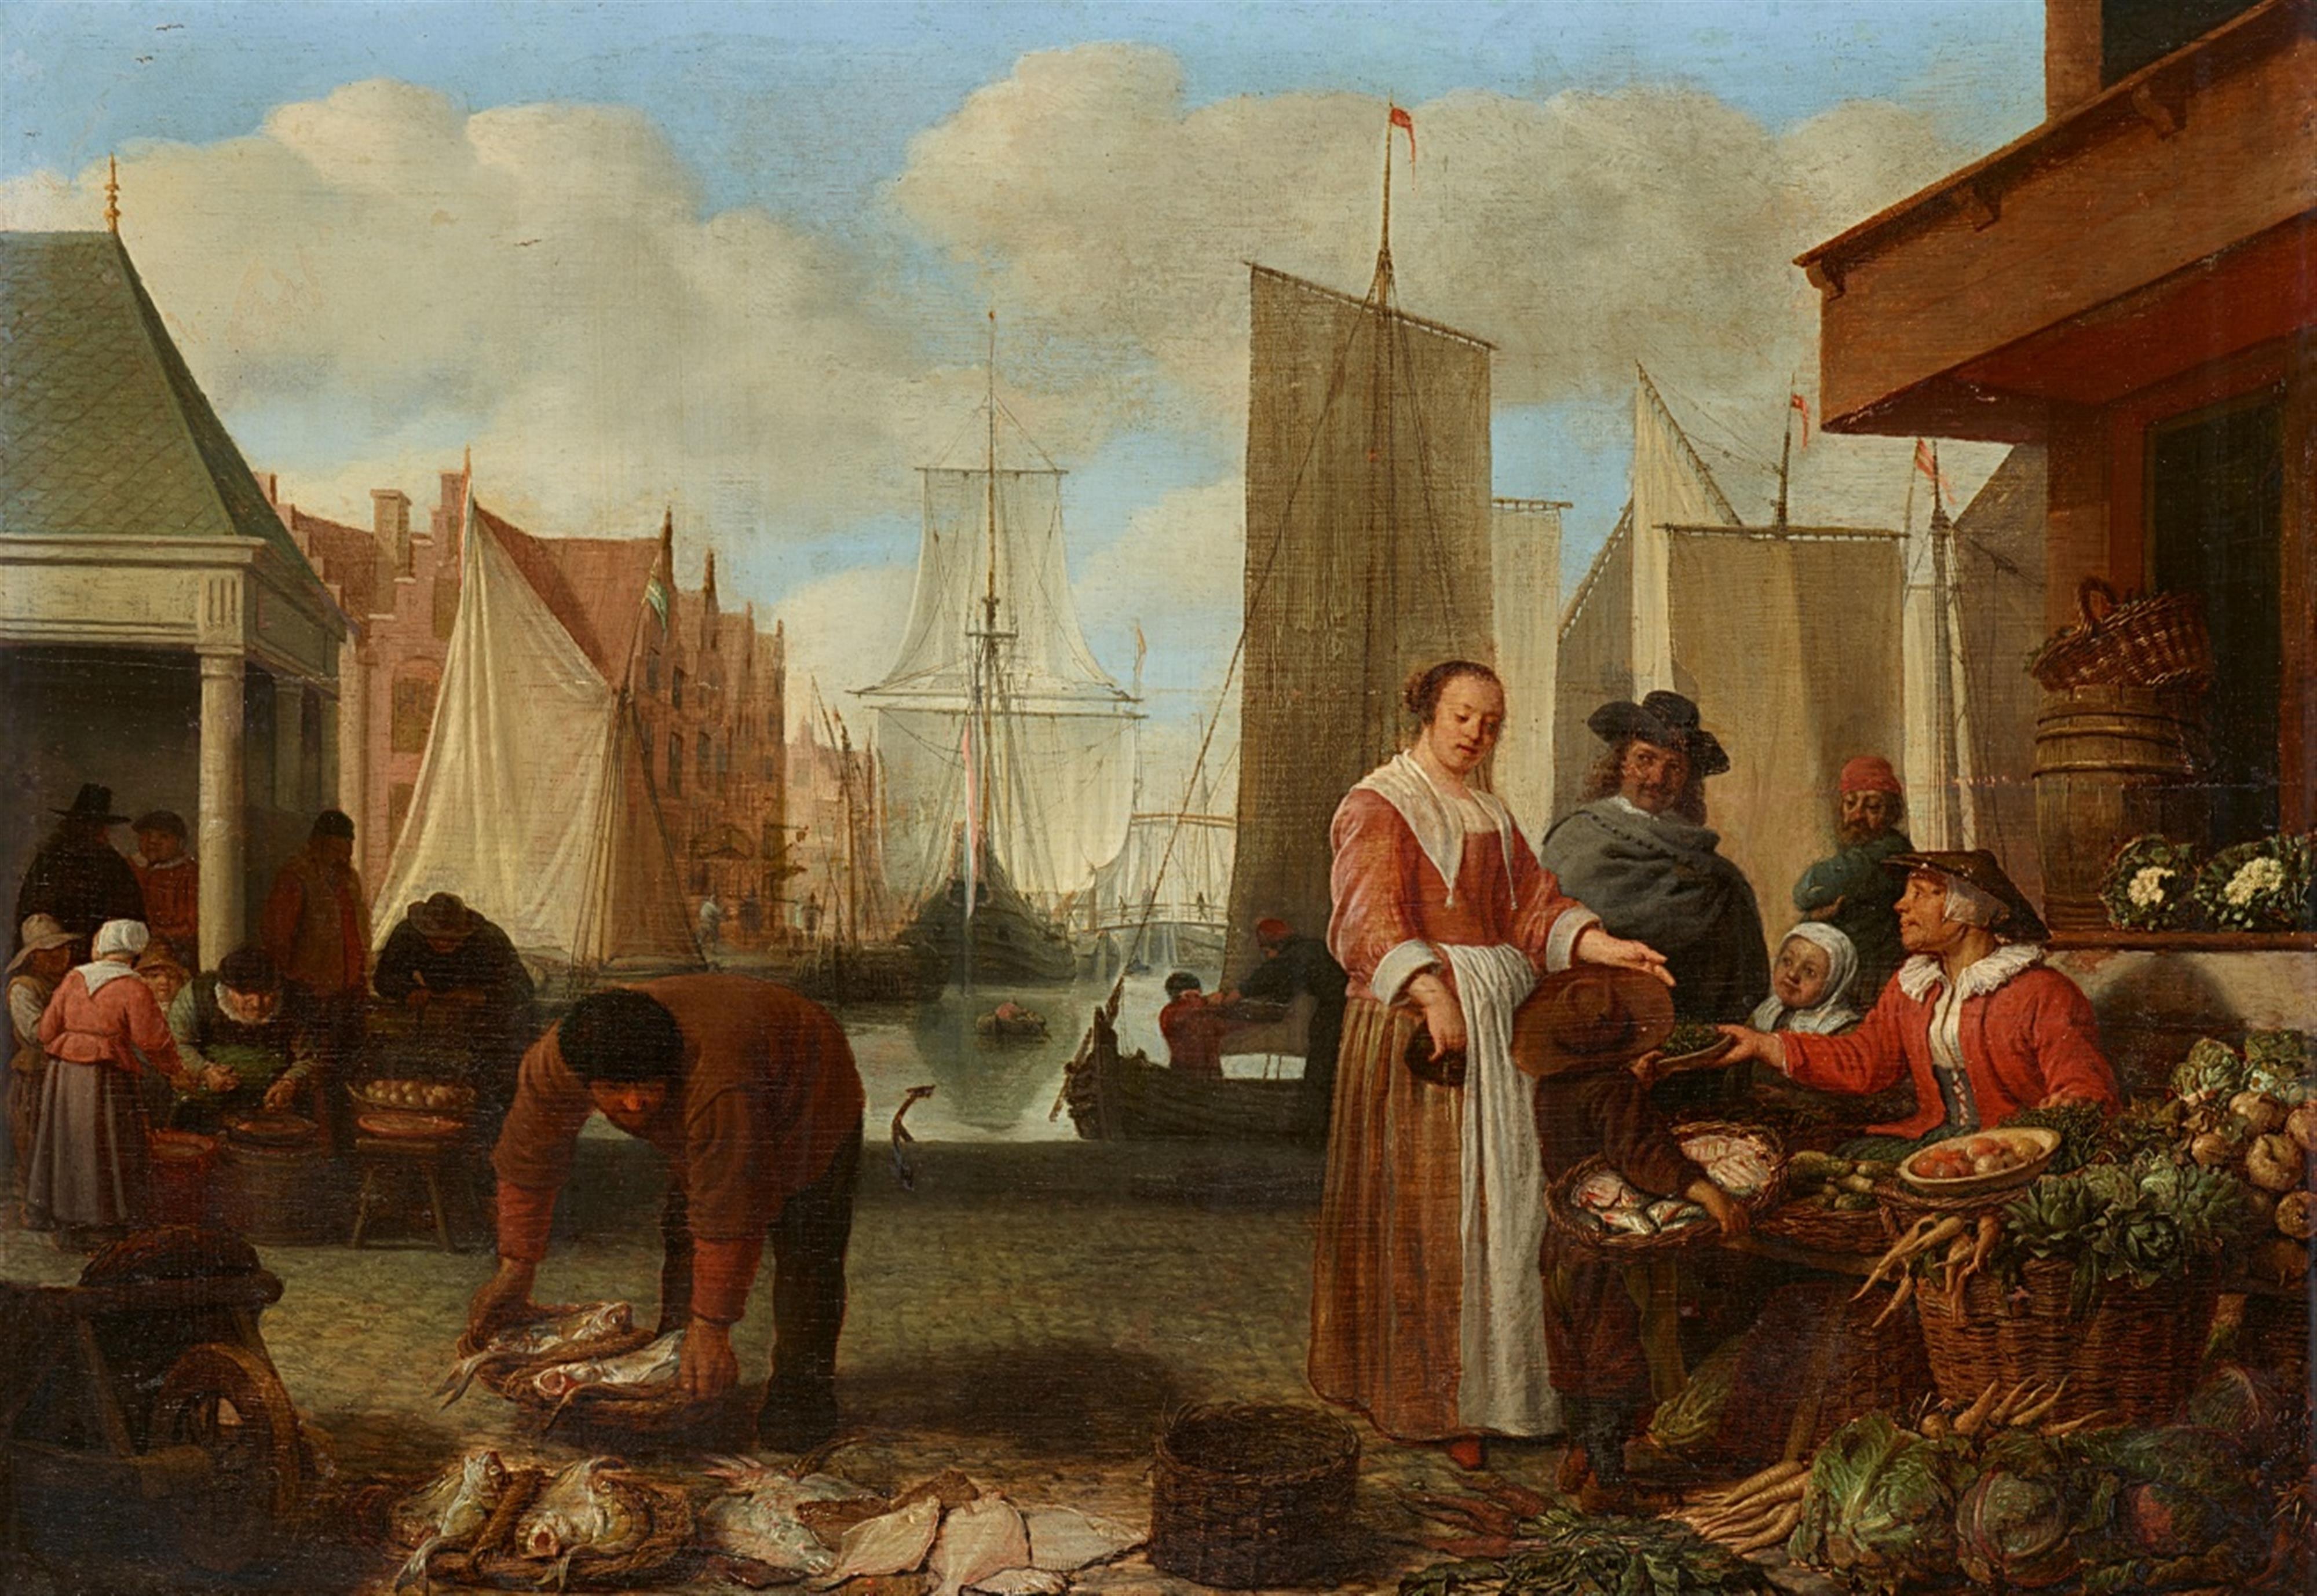 Hendrick Martensz Sorgh - A Market in a Harbour - image-1